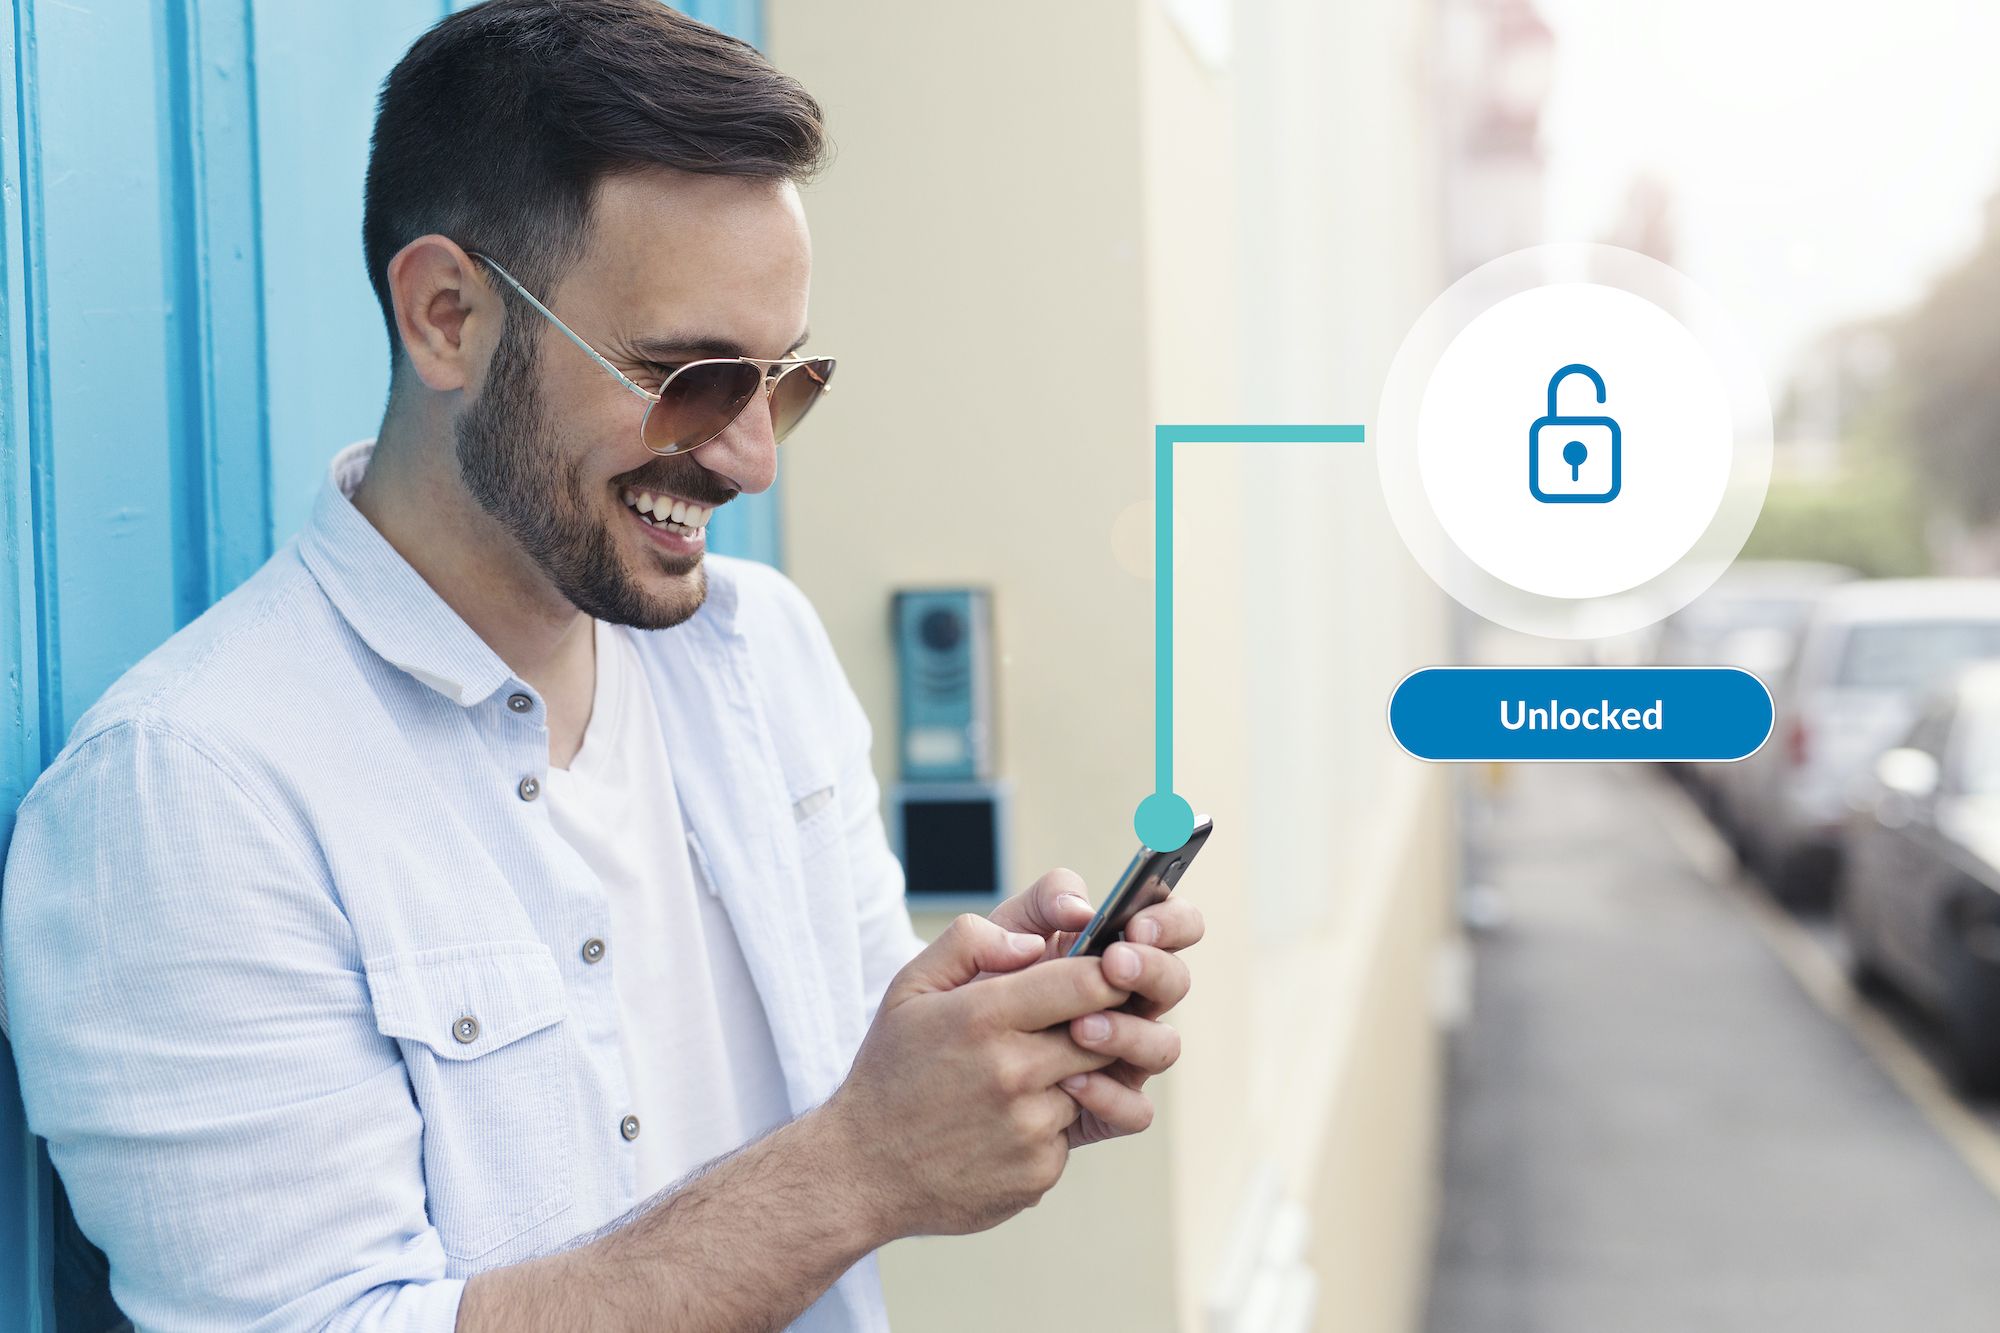 Smiling man using phone to unlock door with smart home technology